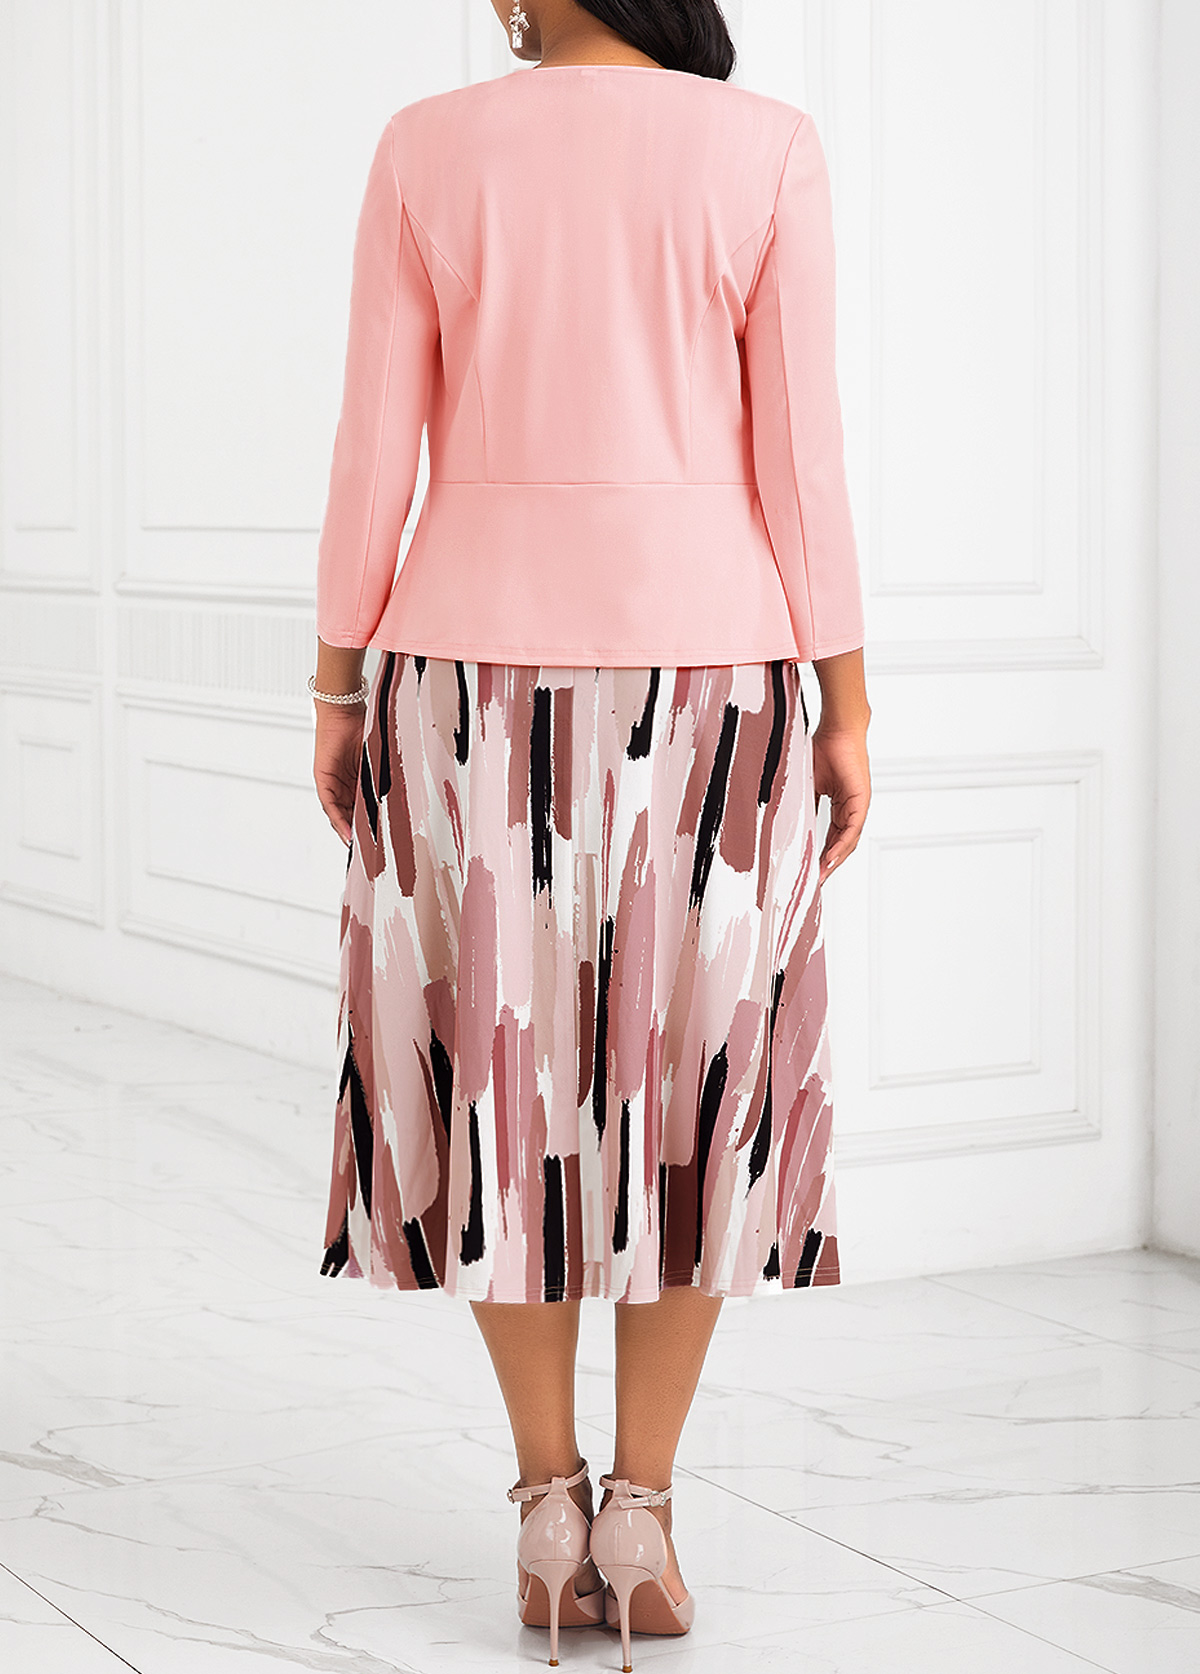 Two Piece Belted Pink Round Neck Dress and Cardigan